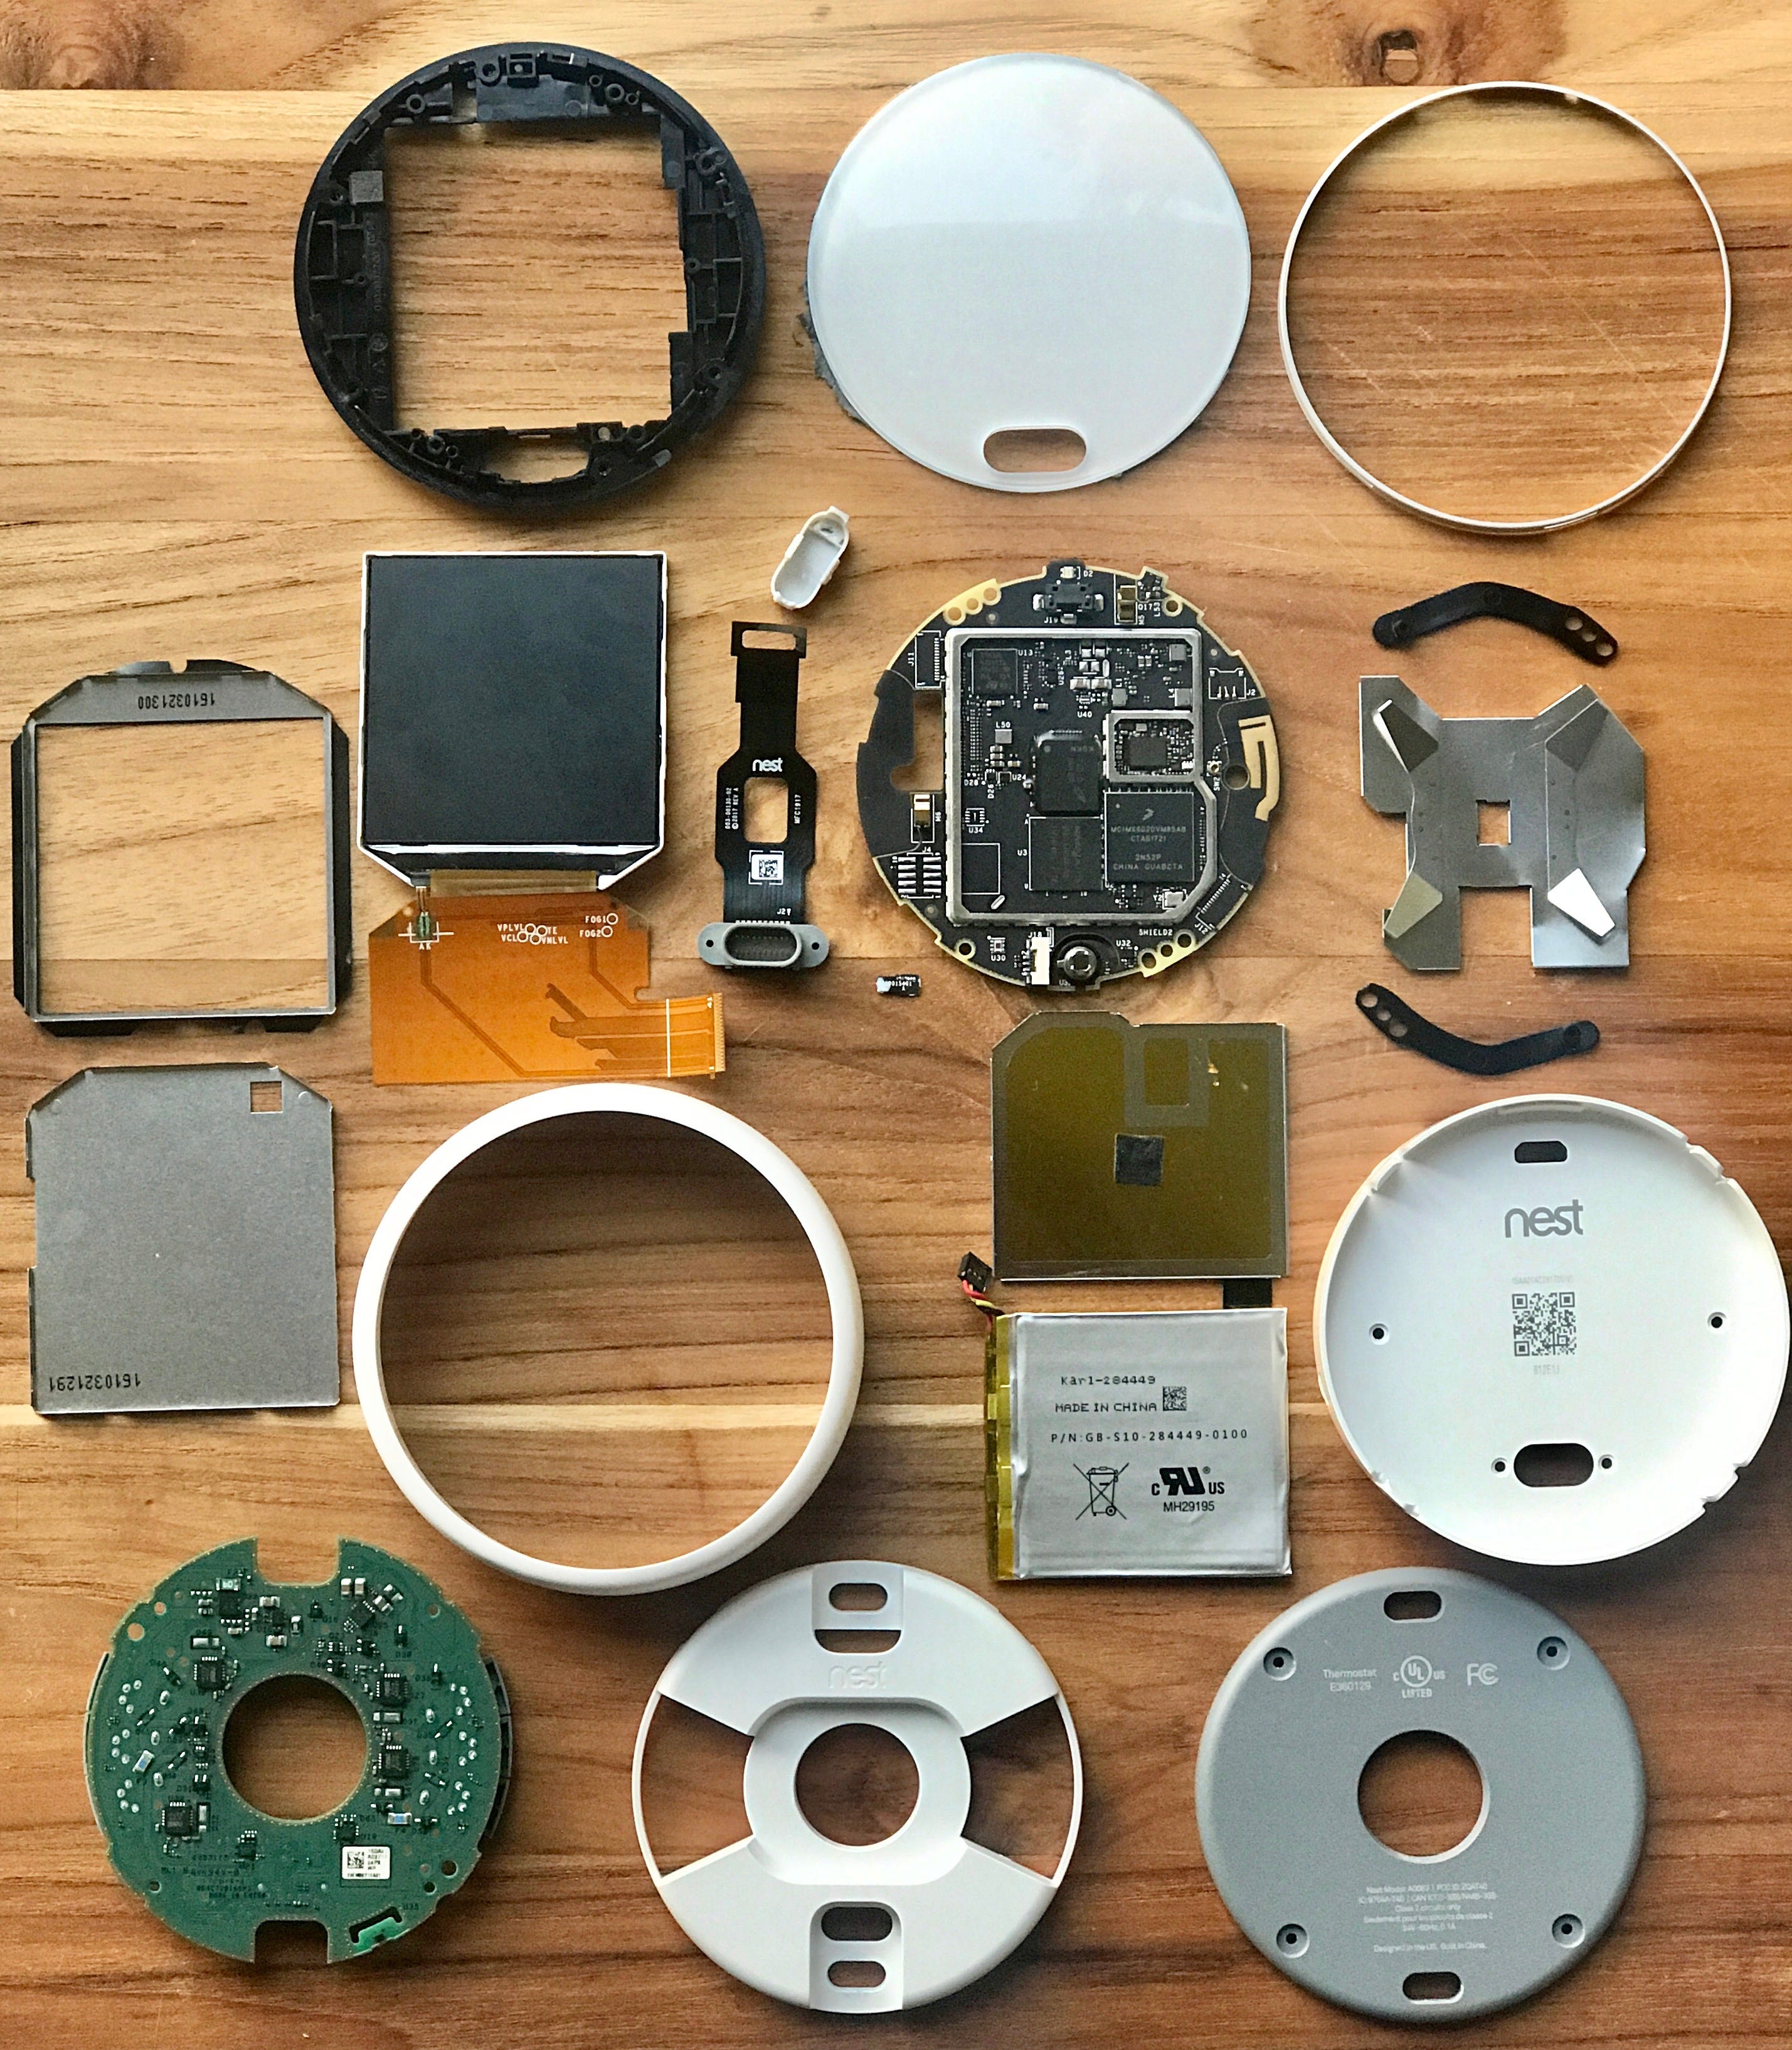 Nest Thermostat E teardown, and on making beautiful devices for the home |  by Justin Alvey | Medium